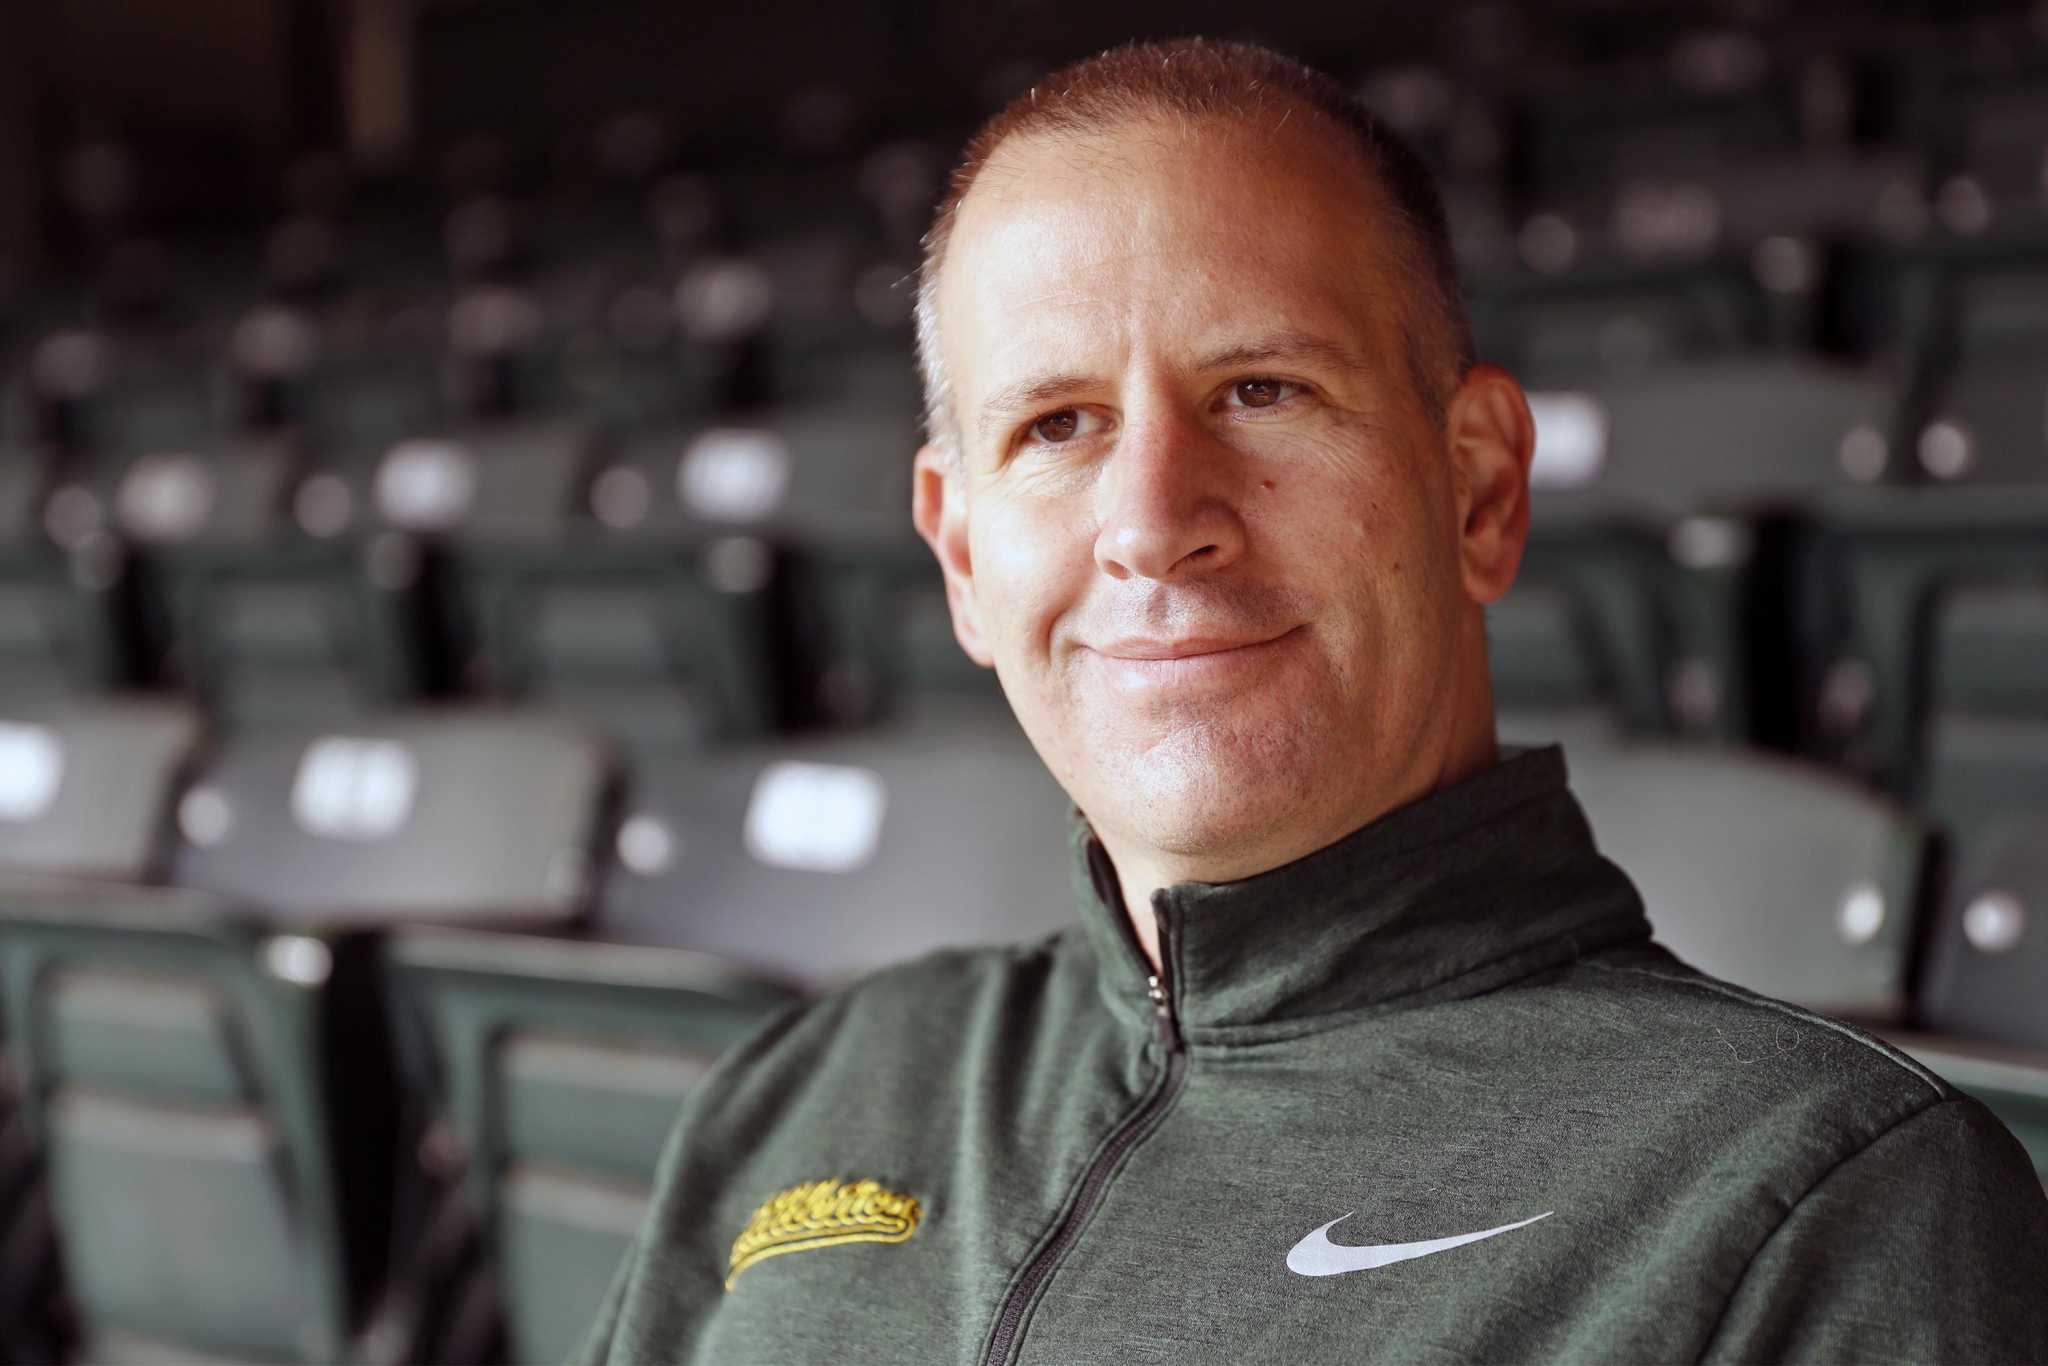 GM David Forst on A's 2022 collapse: 'It's frustrating to watch